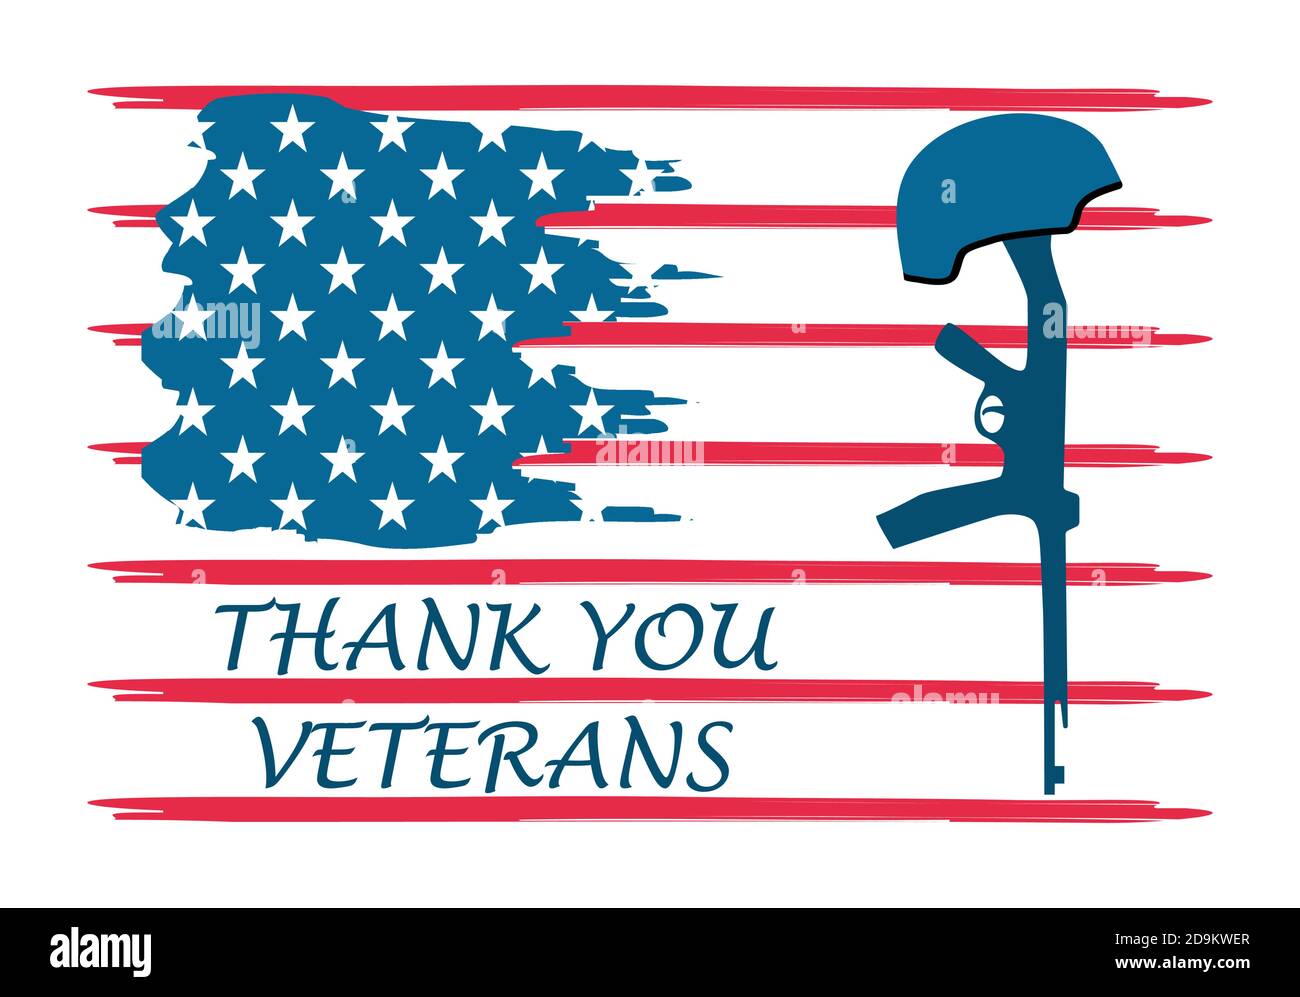 Veterans day concept vector. Military event is celebrated in 11th November in United States. The helmet hangs on the rifle. USA flag background. Stock Vector